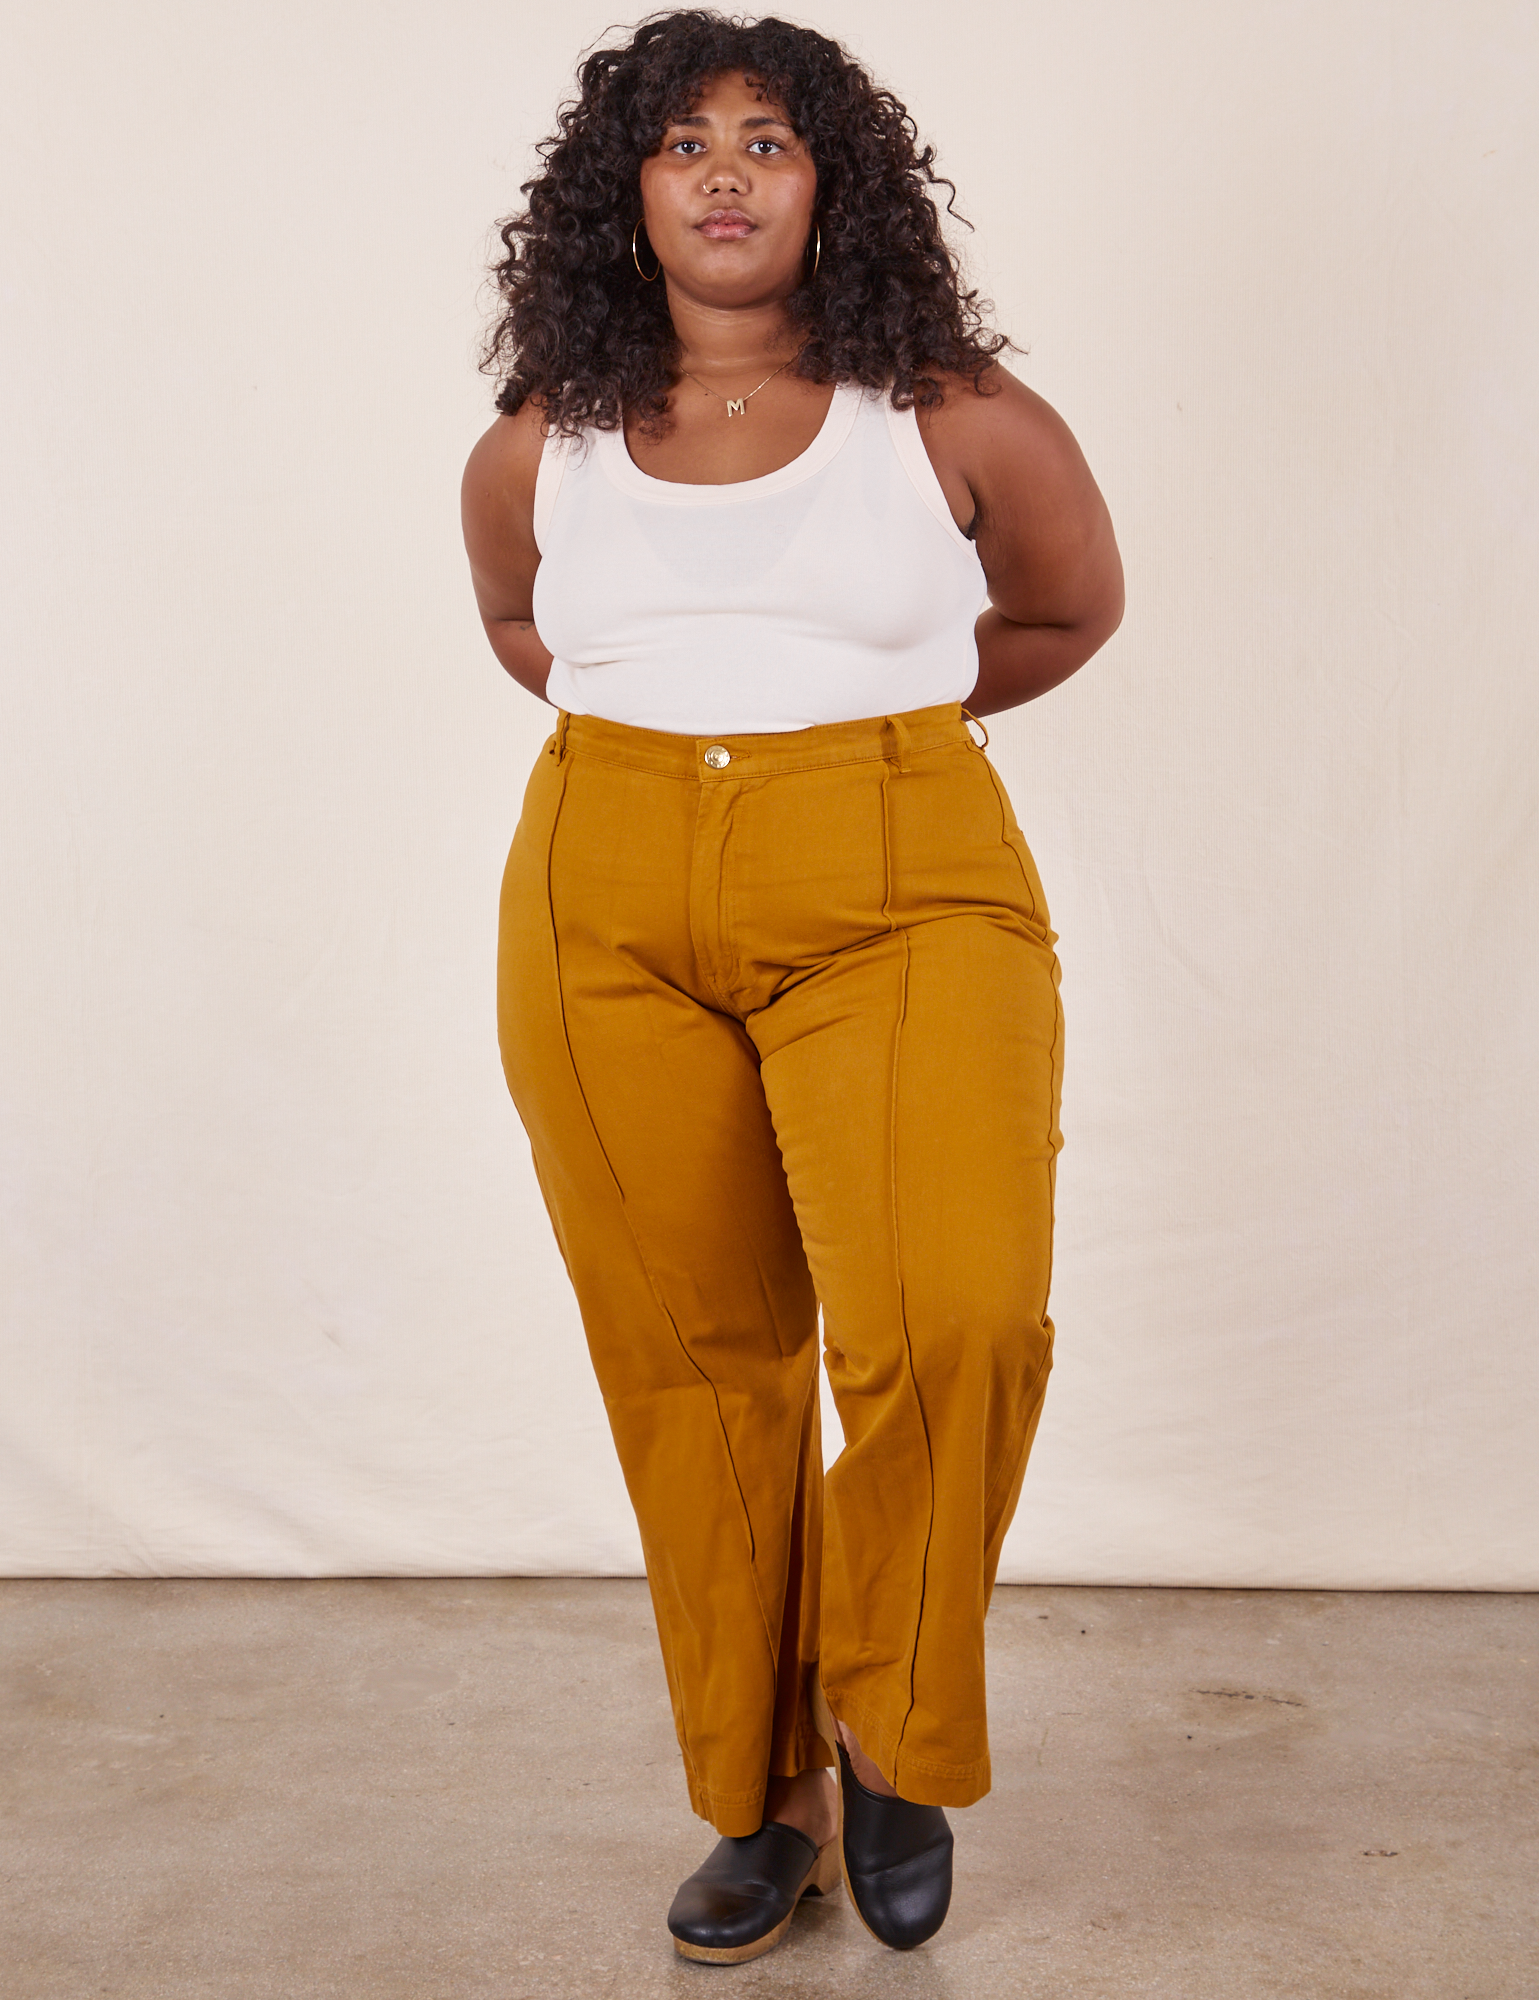 Morgan is wearing Western Pants in Spicy Mustard and vintage off-white Tank Top